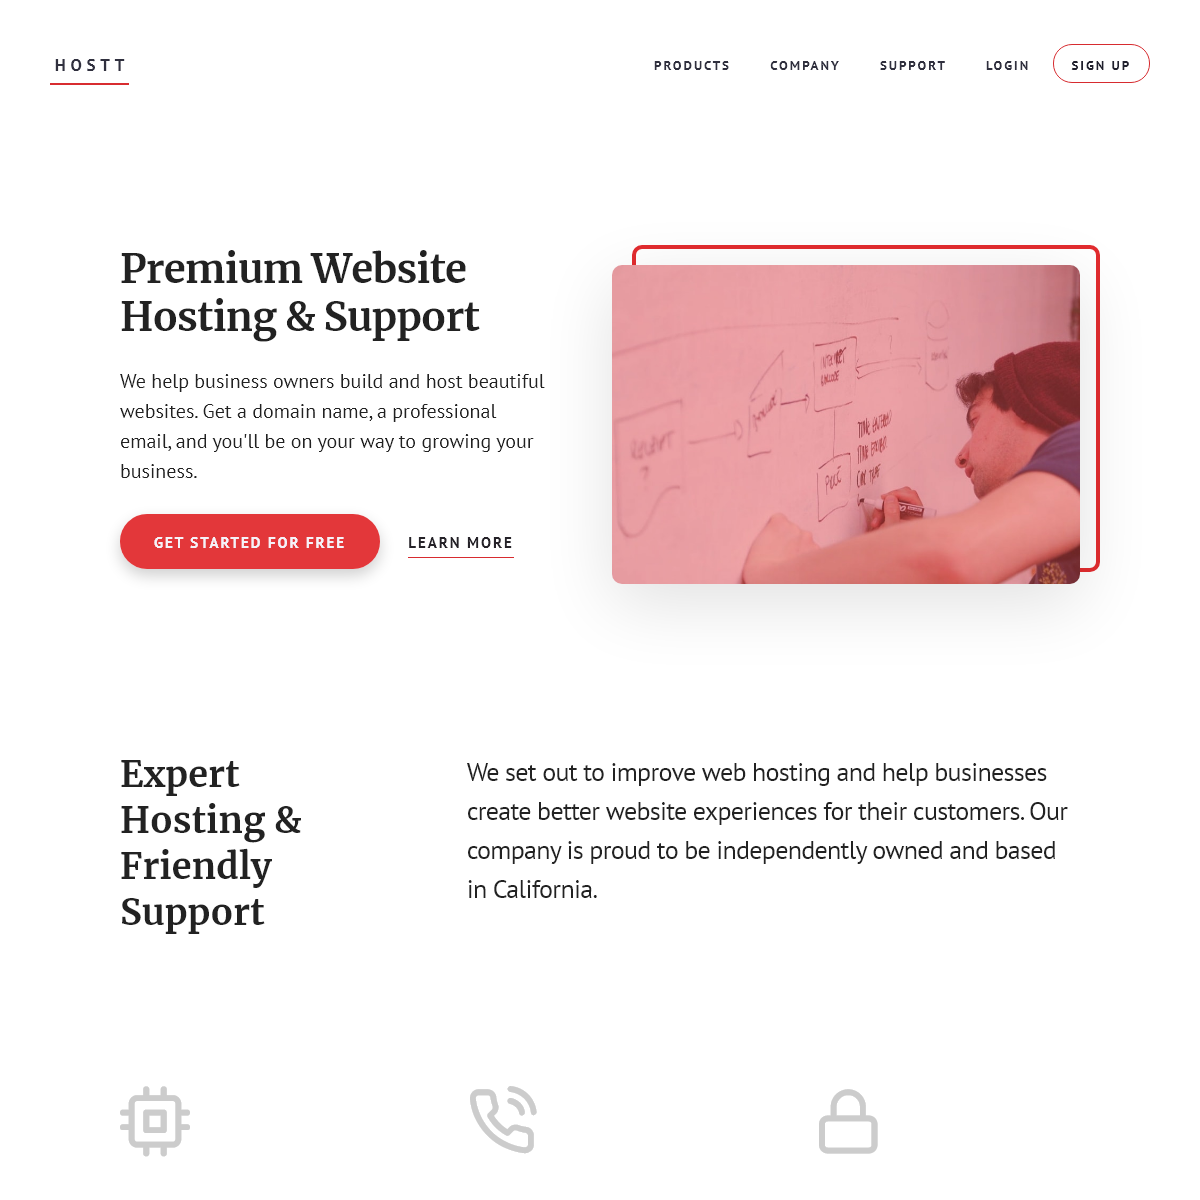 Premium Website Hosting and Support Services â€“ Premium Website Hosting and Support